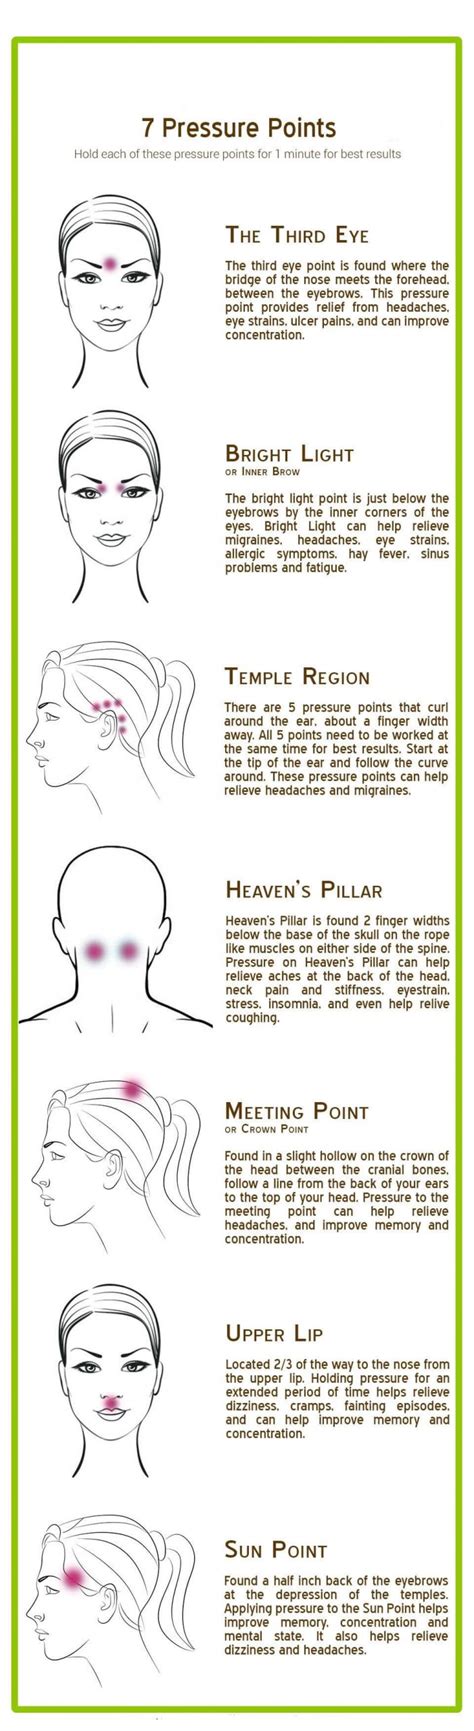 7 Pressure Points To Relieve Stress And Anxiety